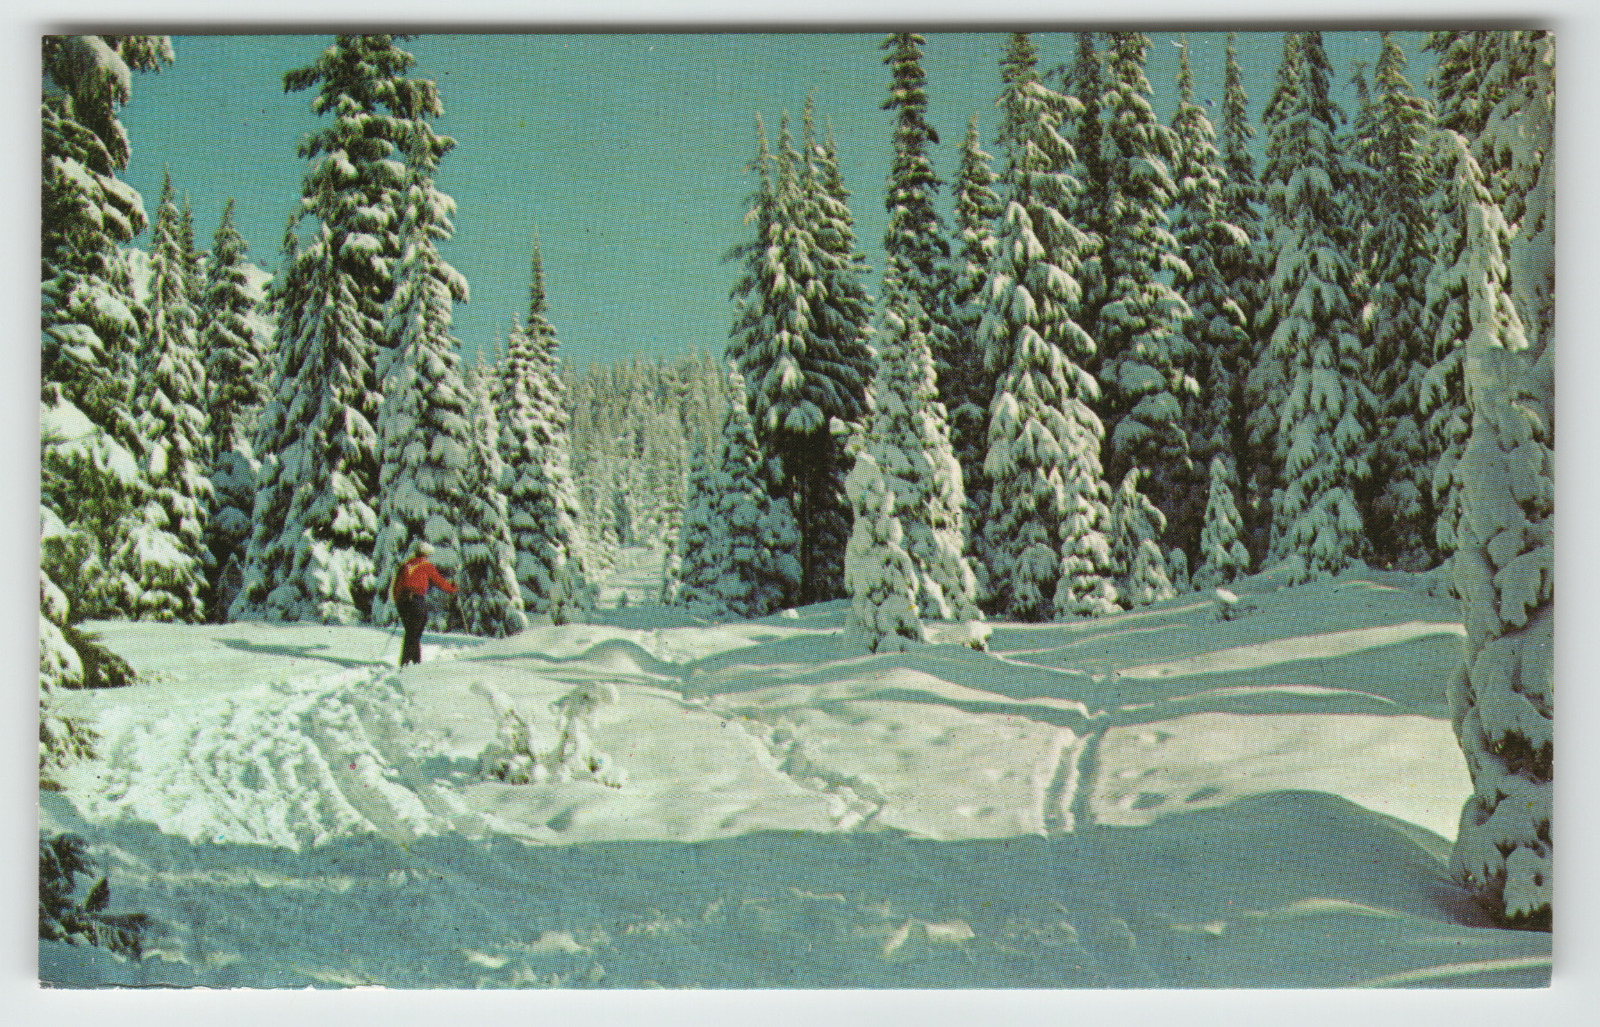 Postcard Skier on Beautiful Snow Covered Mountain